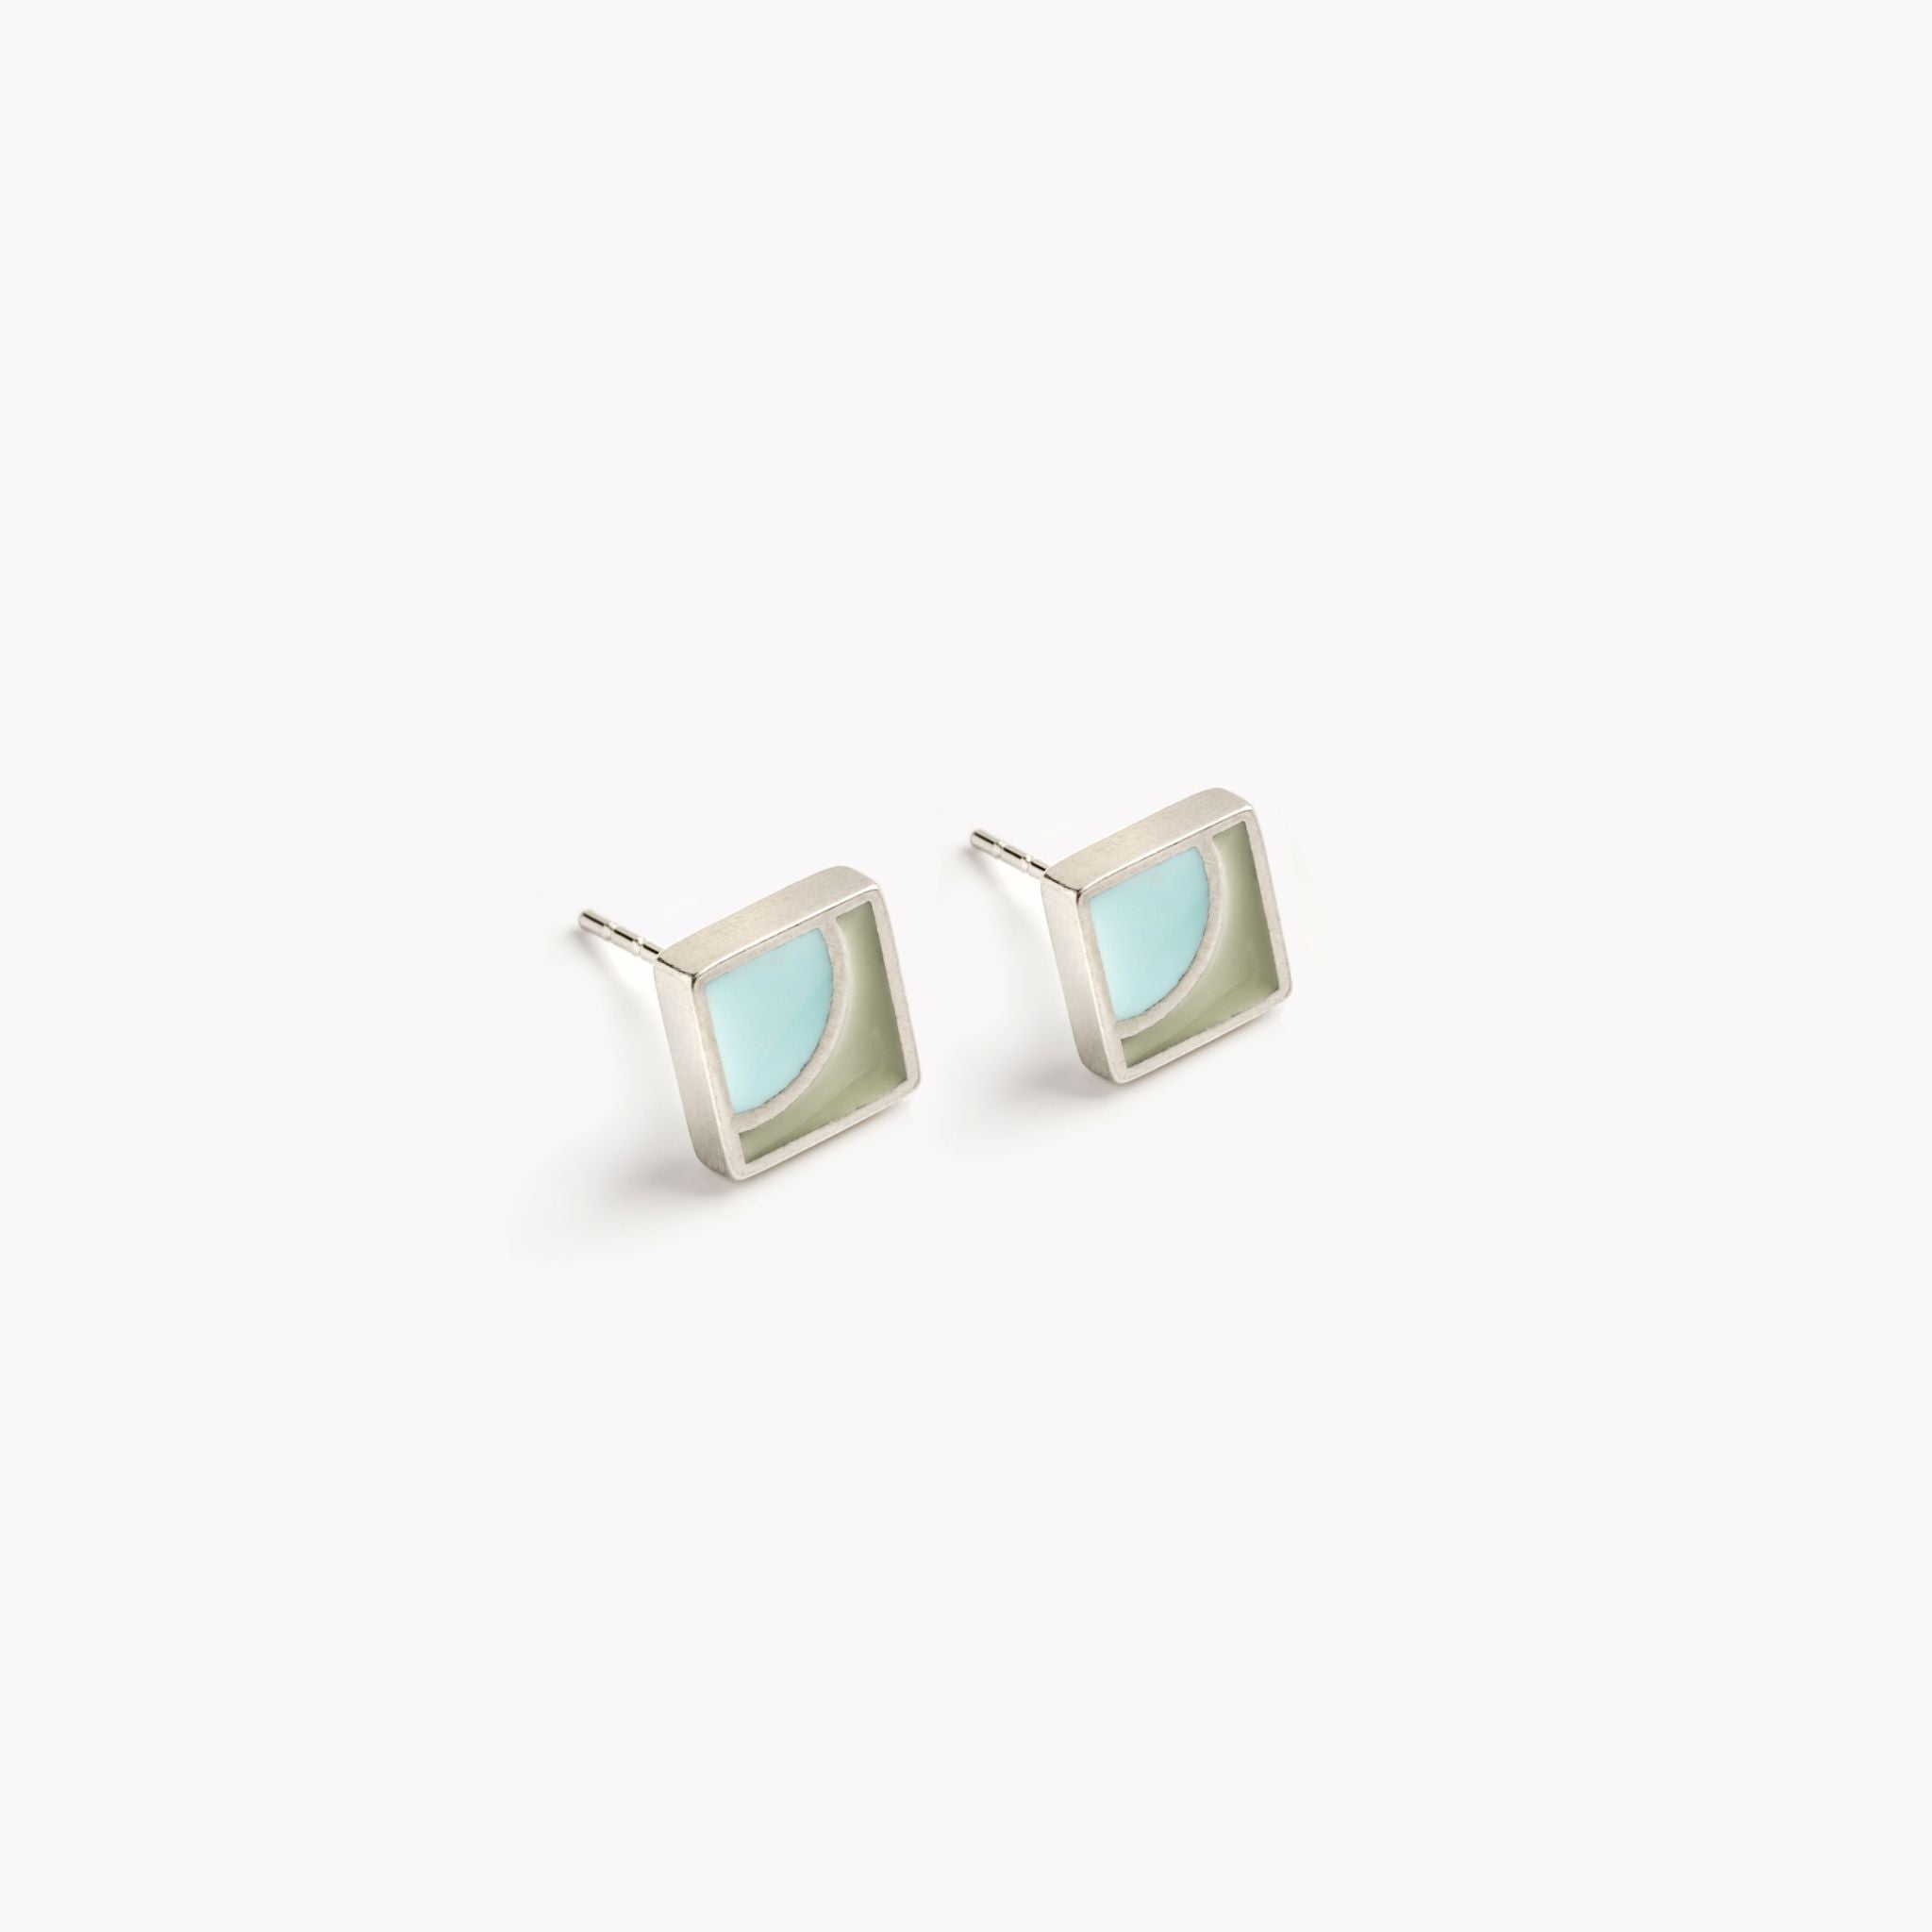 Turquoise and grey square stud earrings, pewter ear studs, colourful and  square, silver tone, simple minimal design. Warm grey and turquoise, coastal tones, handmade in Wales using recycled tin.